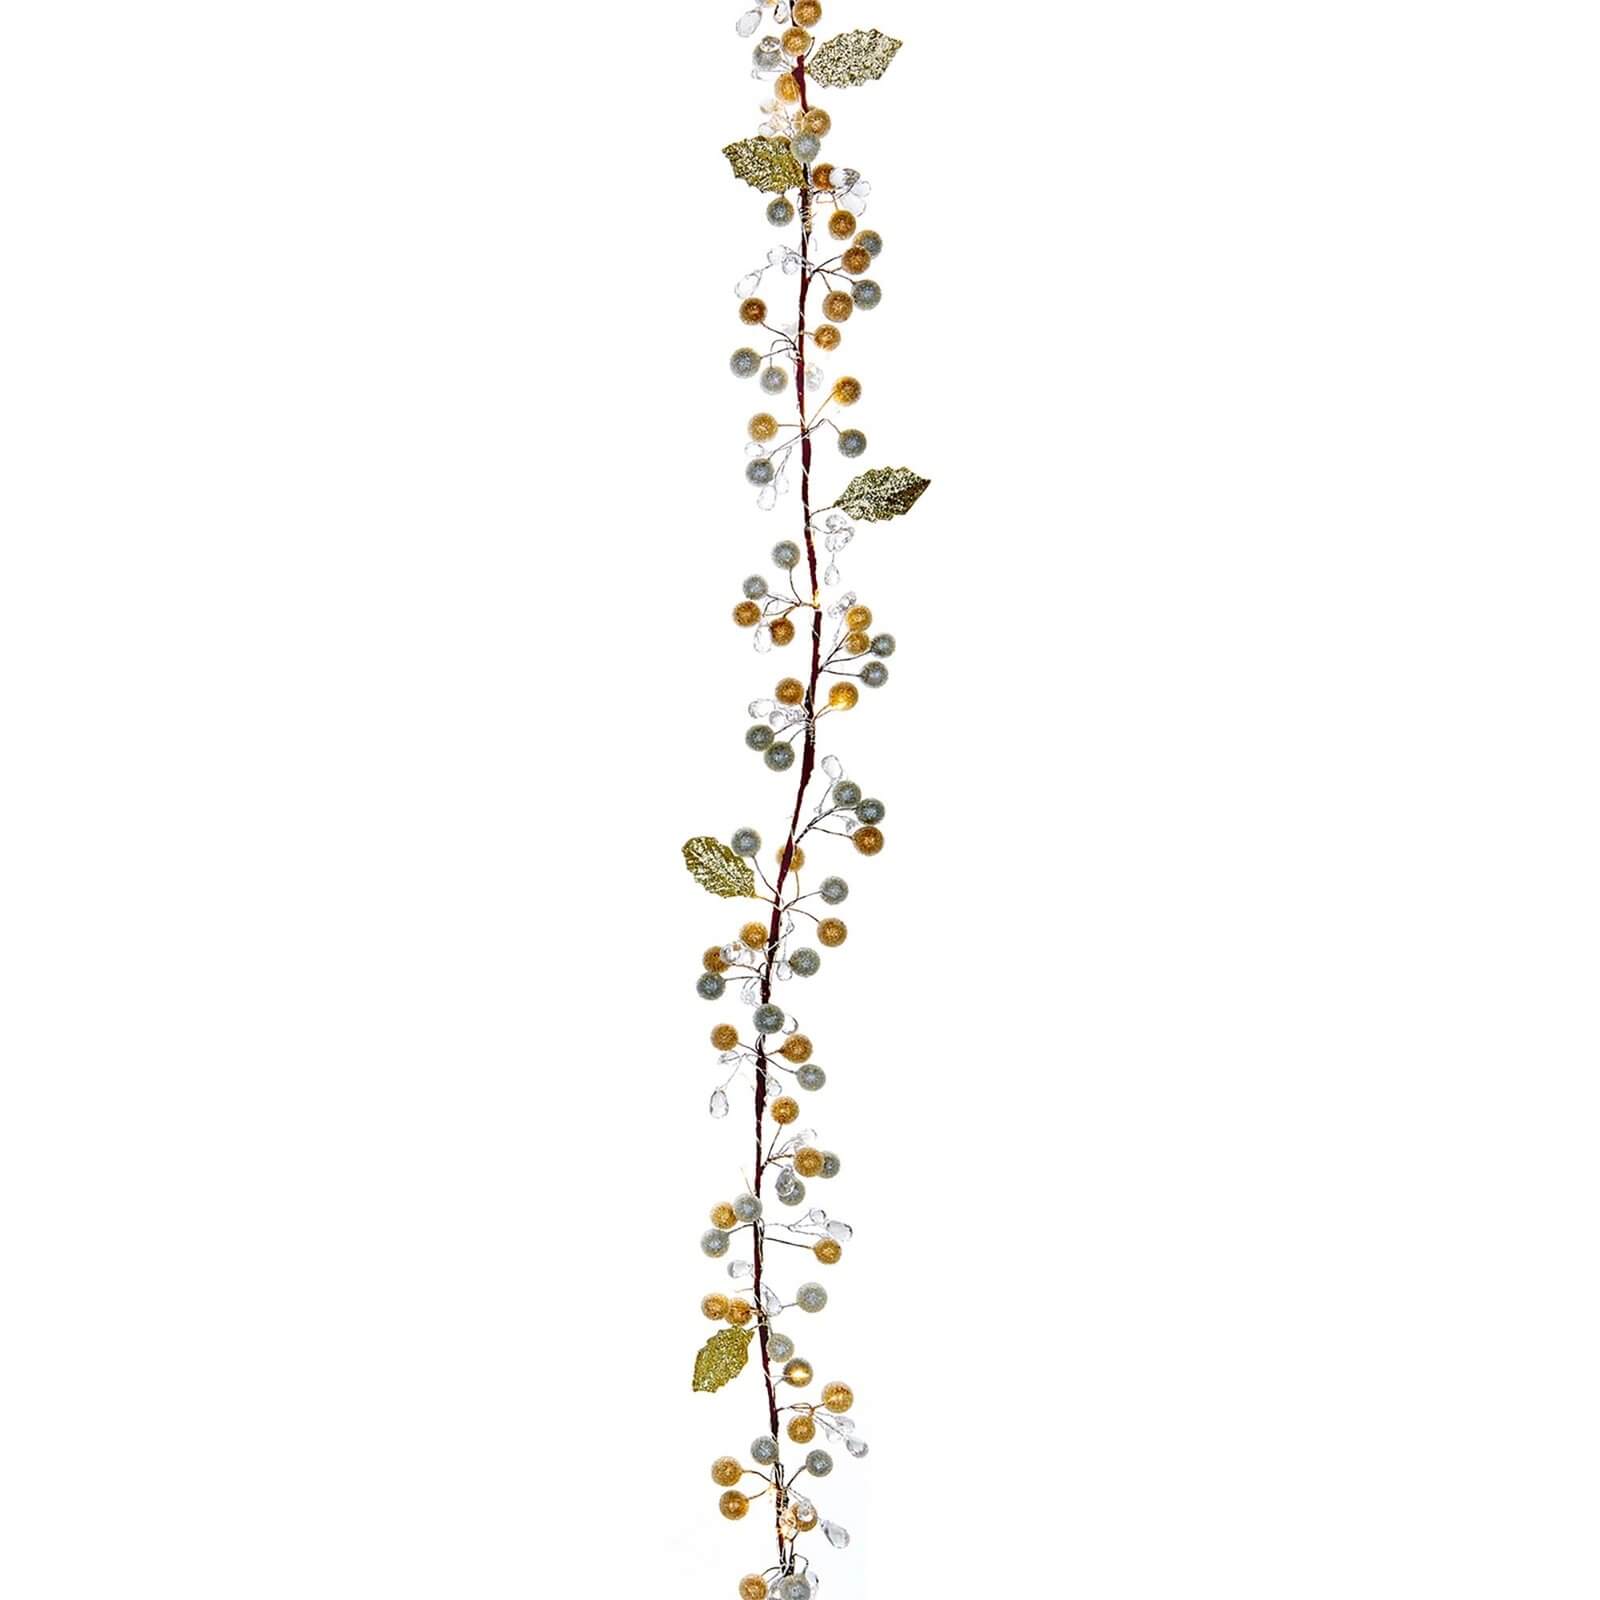 Pre-Lit Garland with Berries 180cm (Battery Operated)